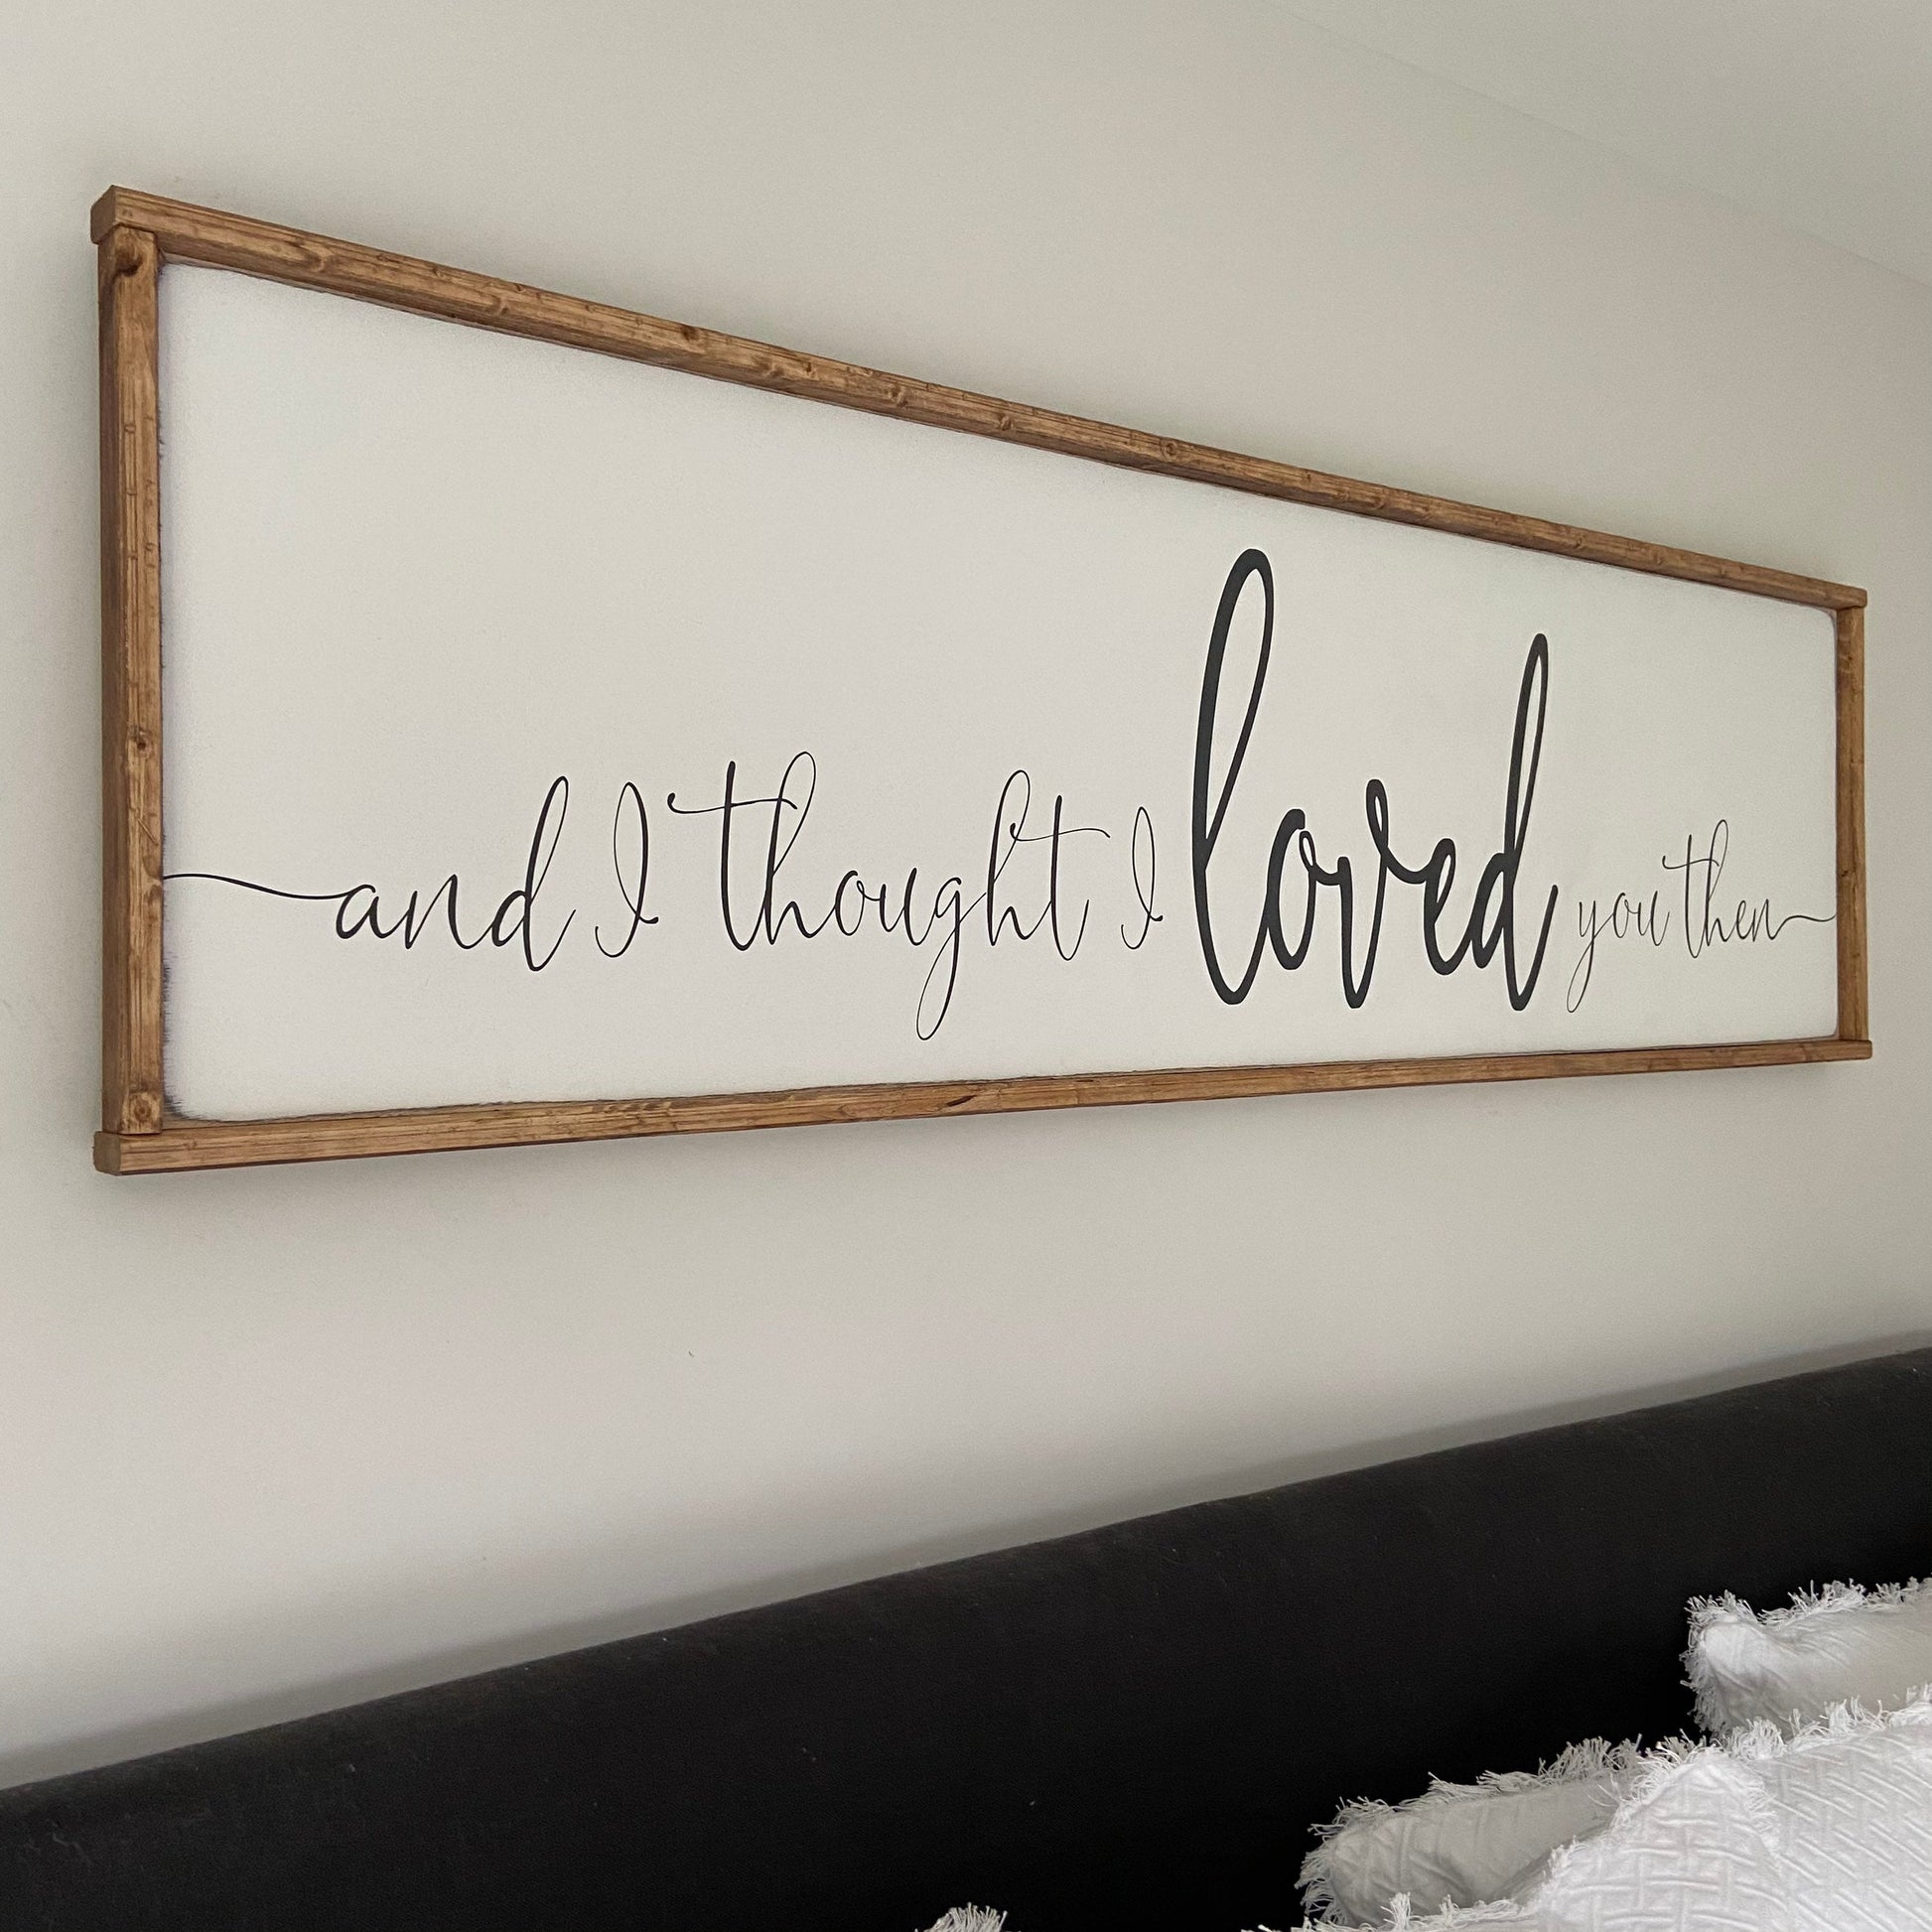 and i thought i loved you then. - above over the bed sign - master bedroom wall art [FREE SHIPPING!]